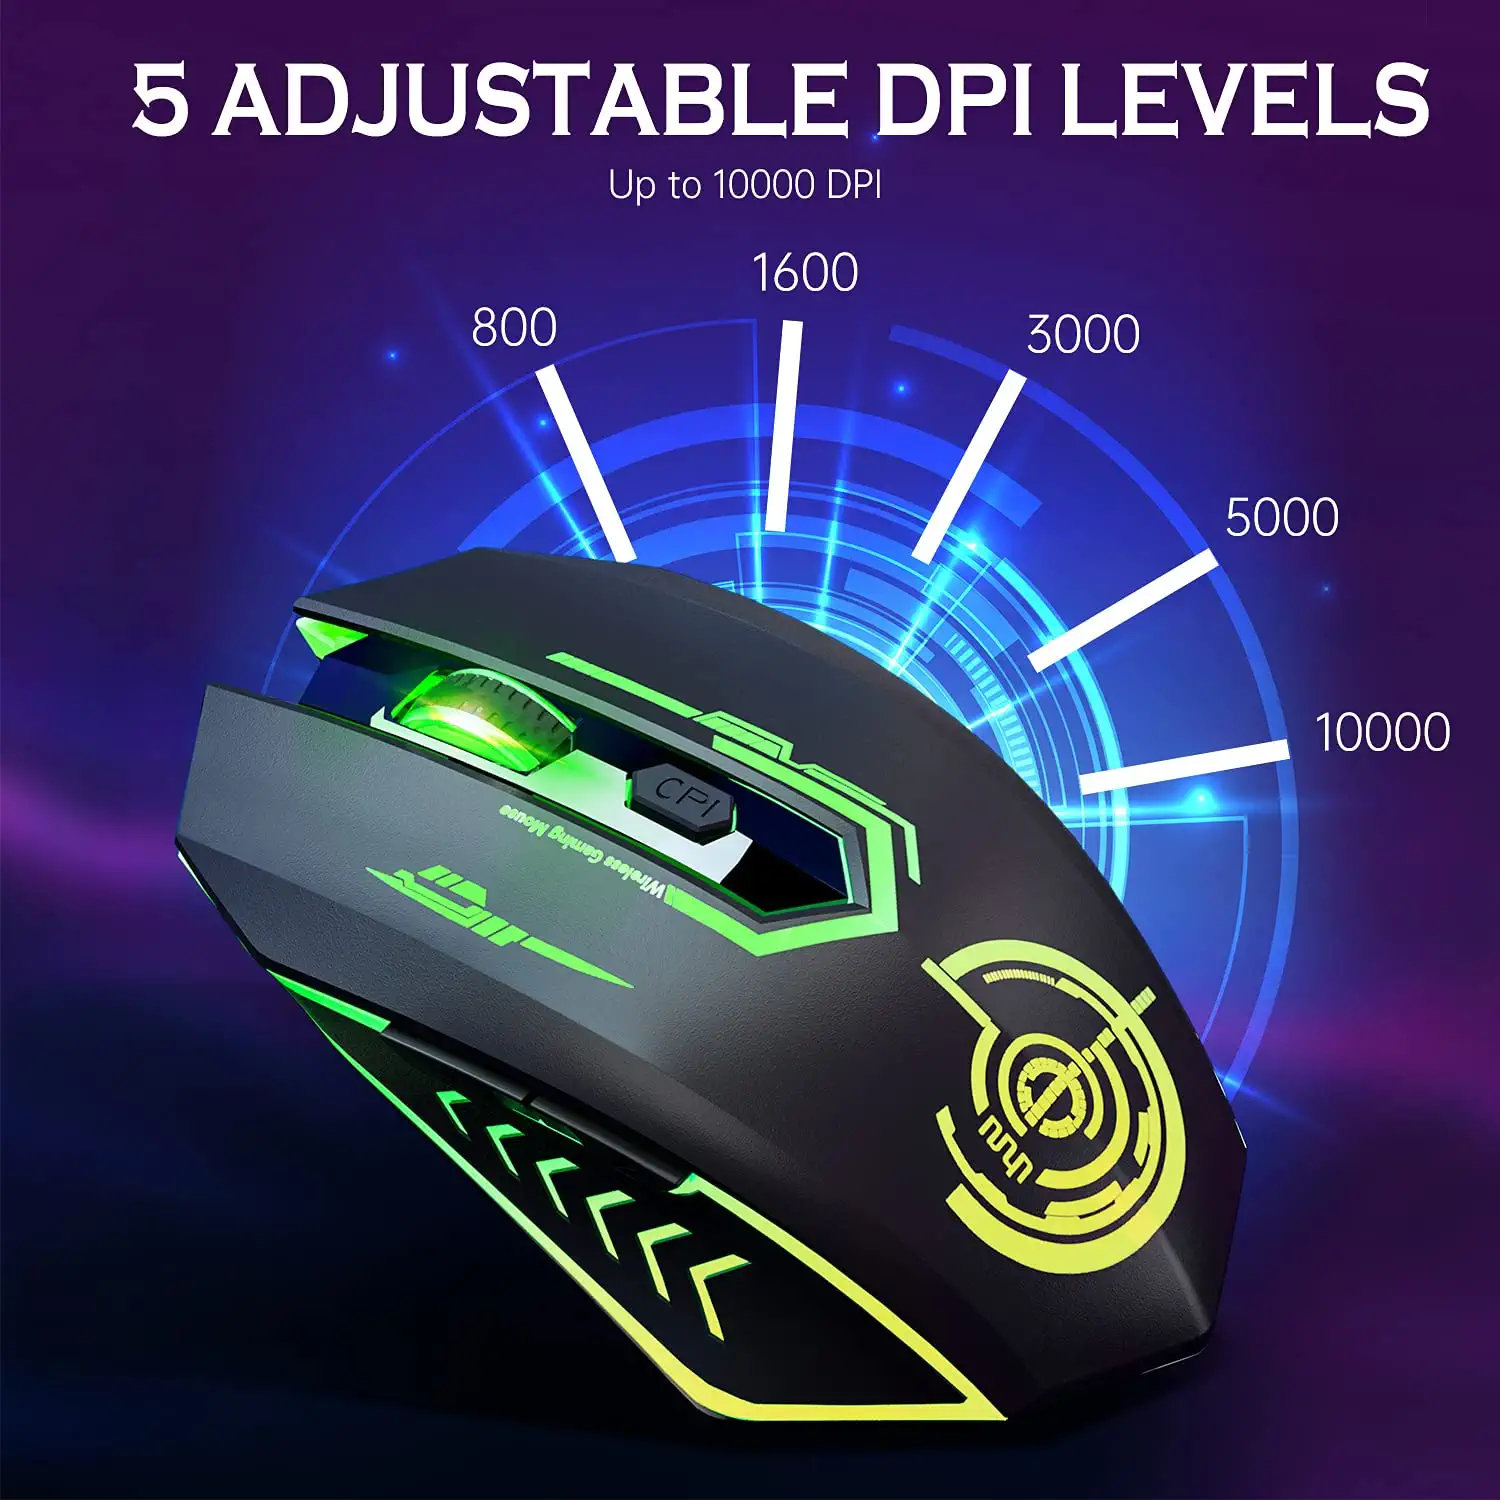 A gaming mouse is a better option for gaming as they usually have a higher DPI and allow you to adjust DPI.